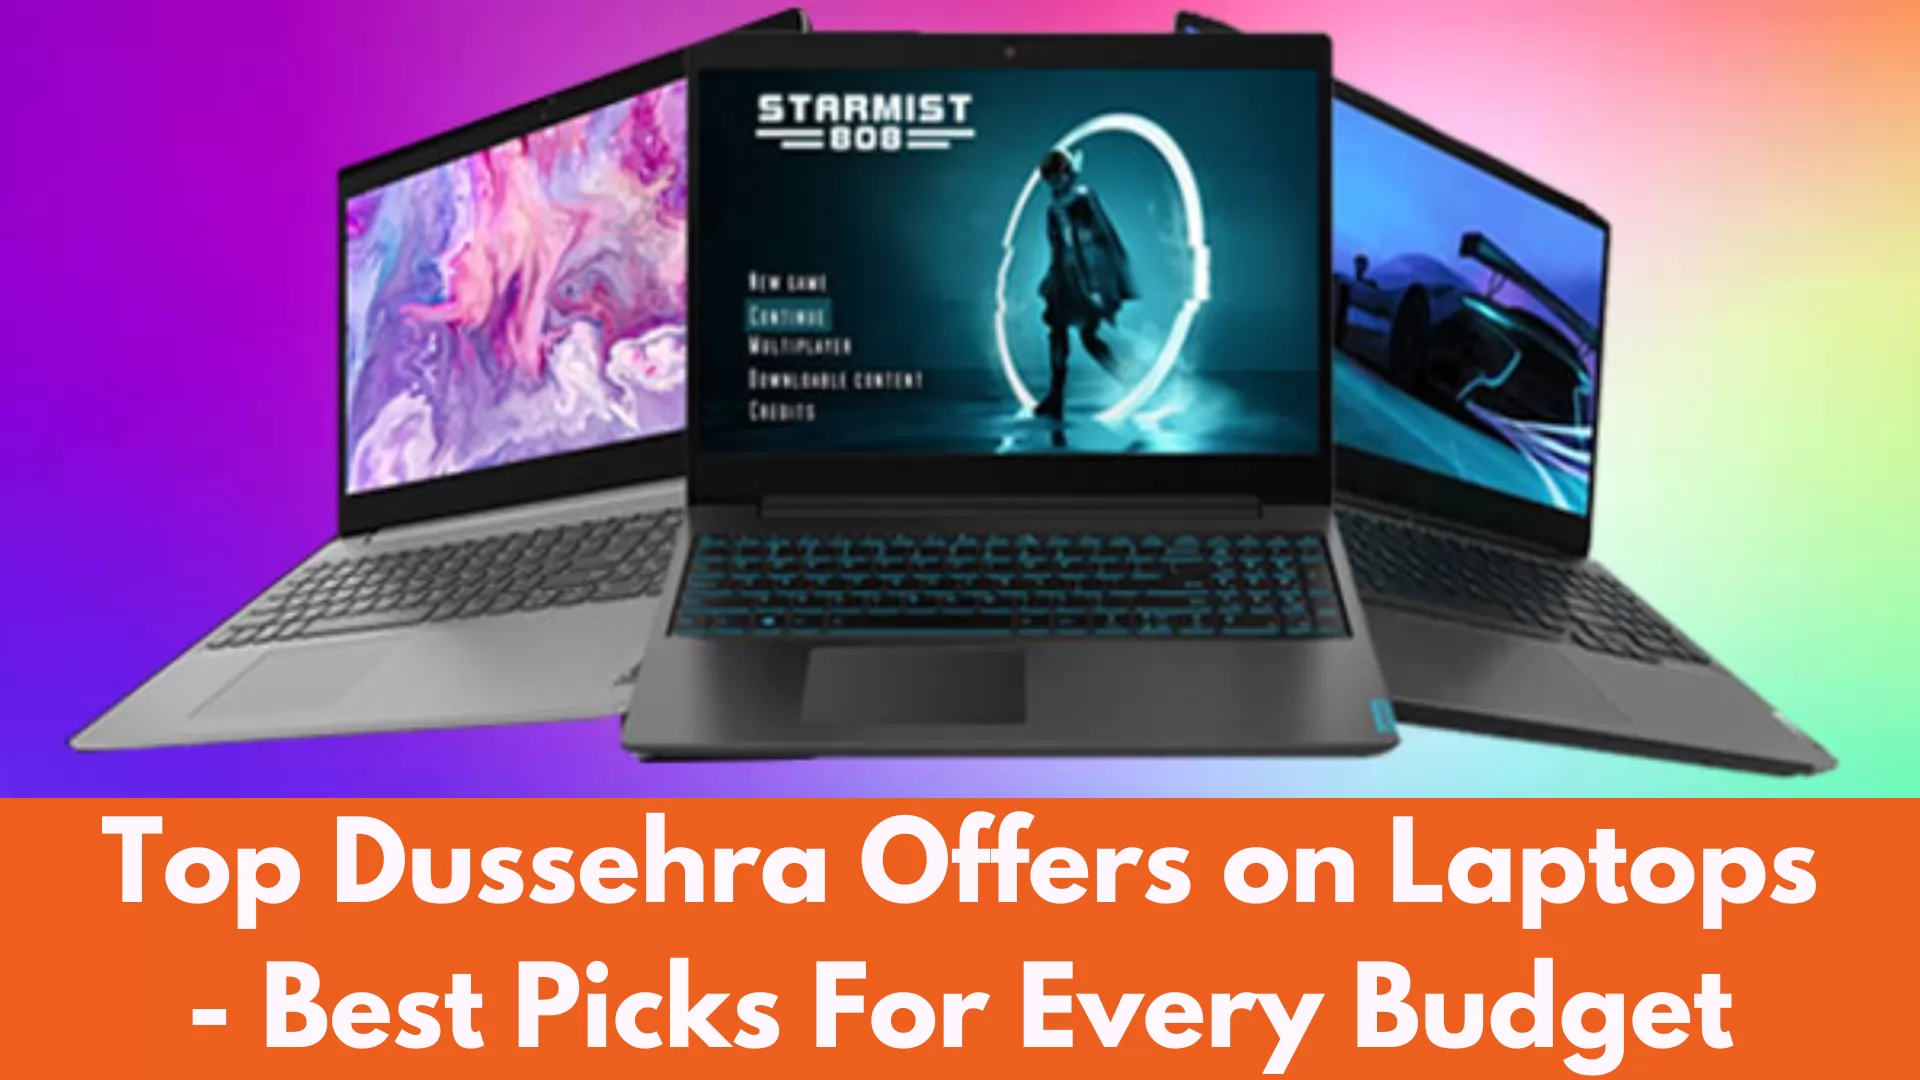 Top Dussehra Offers on Laptops - Best Picks For Every Budget